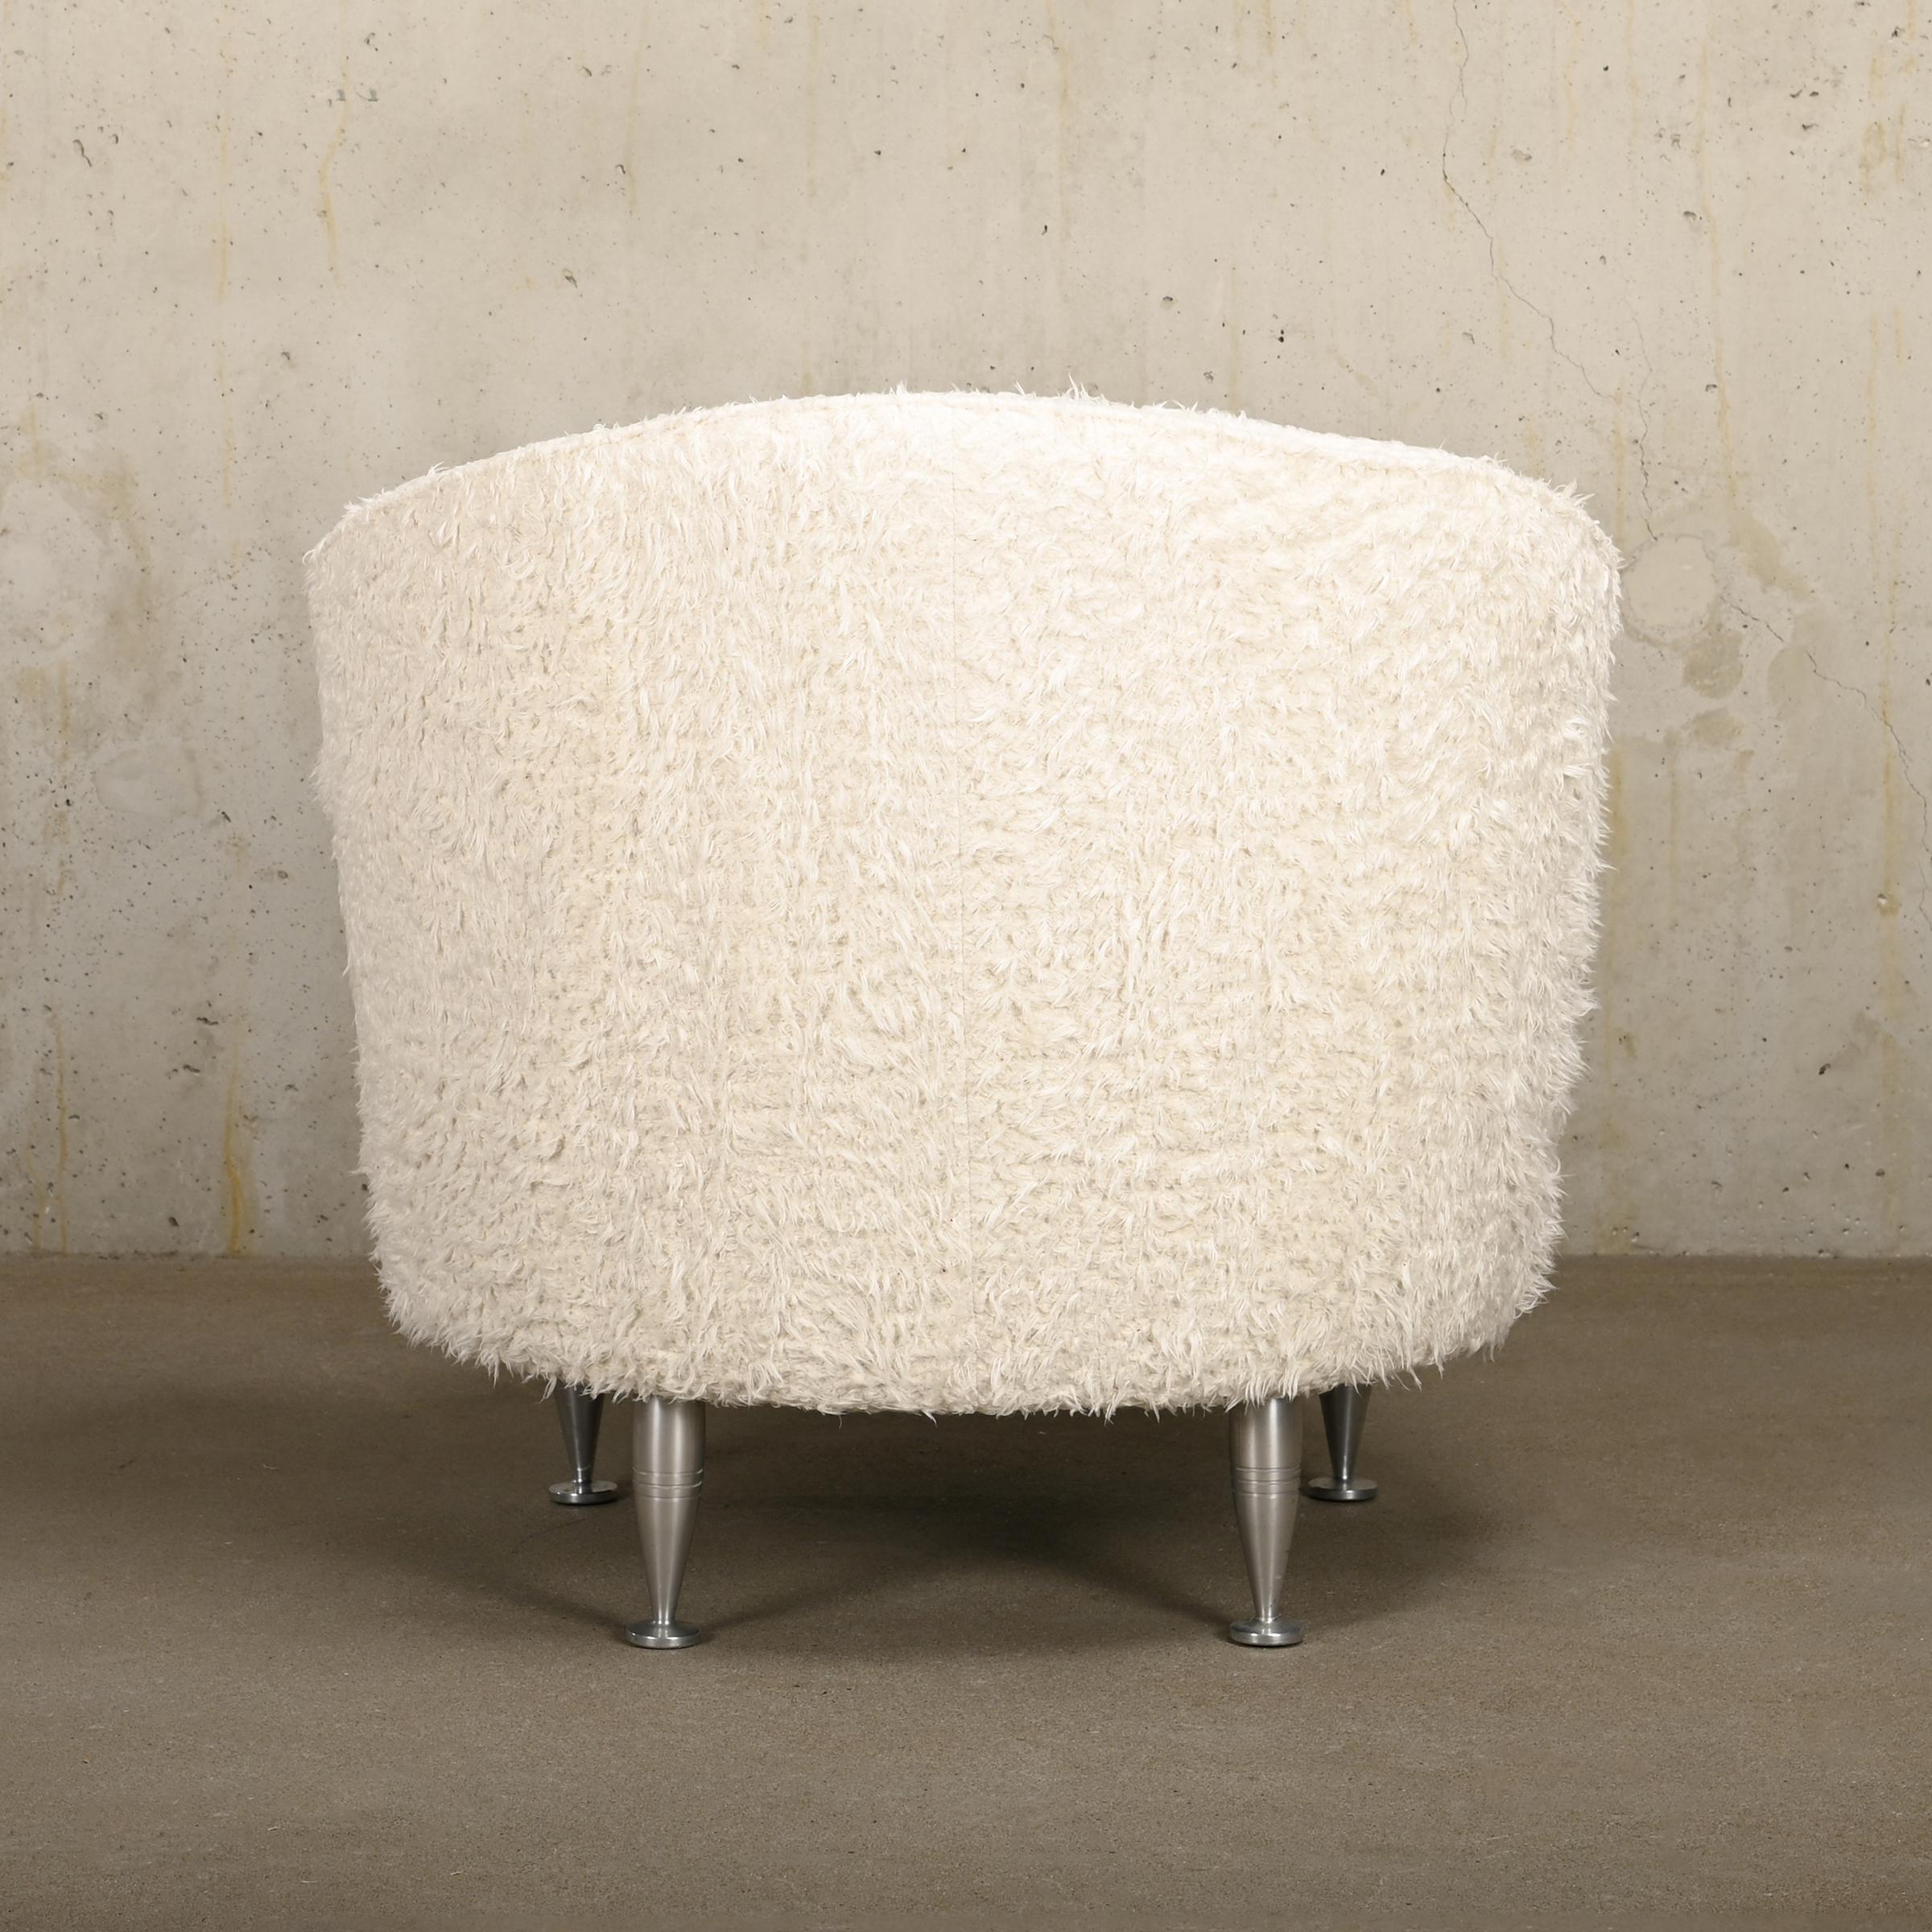 Modern Massimo Iosa Ghini Armchair New Tone in white long pile cotton for Moroso, Italy